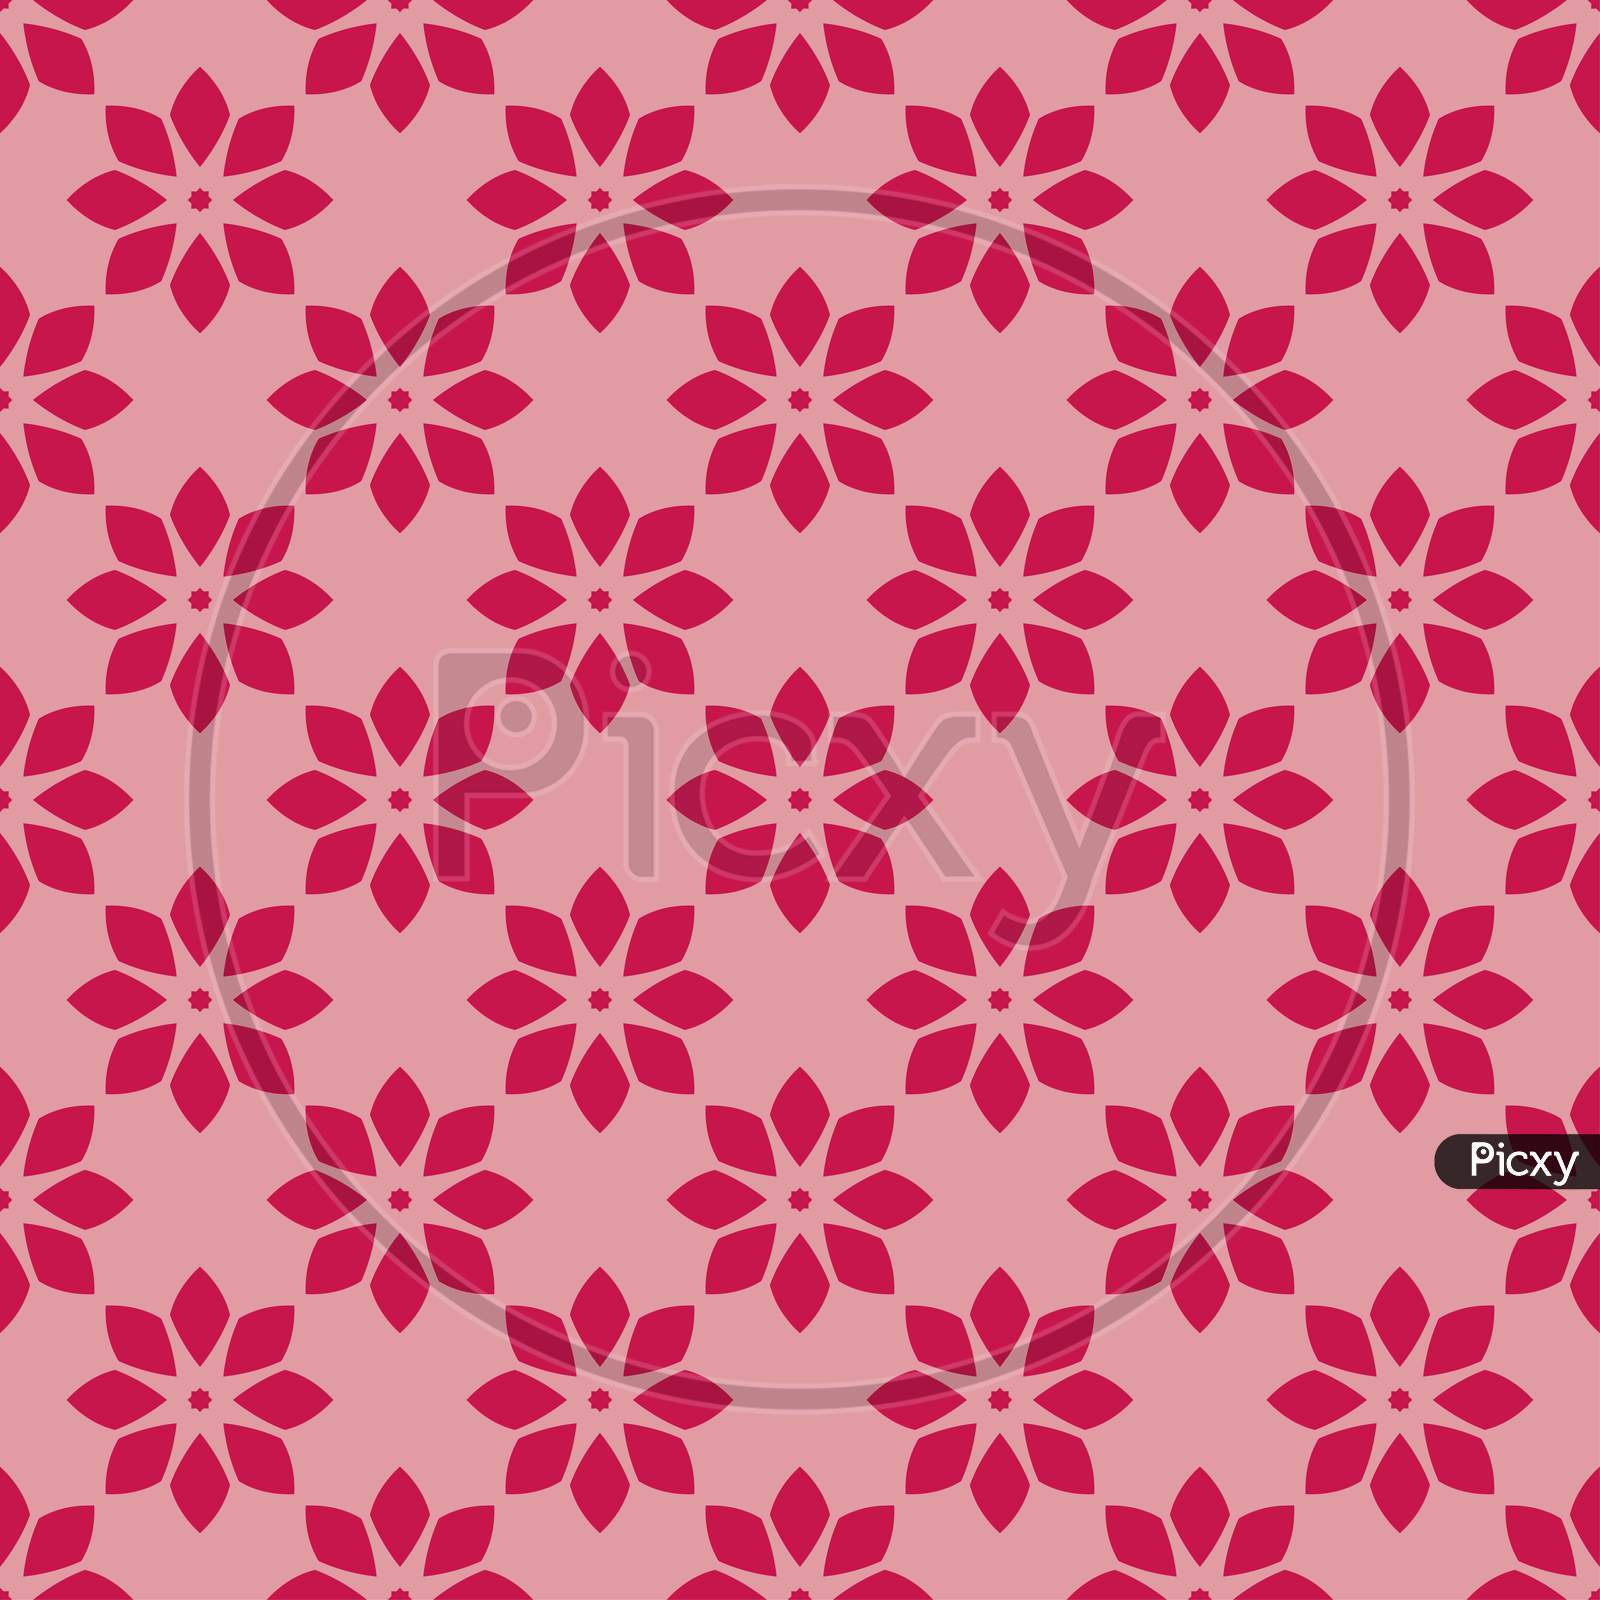 Red Floral Pattern On Pink Seamless Design Backdrop.